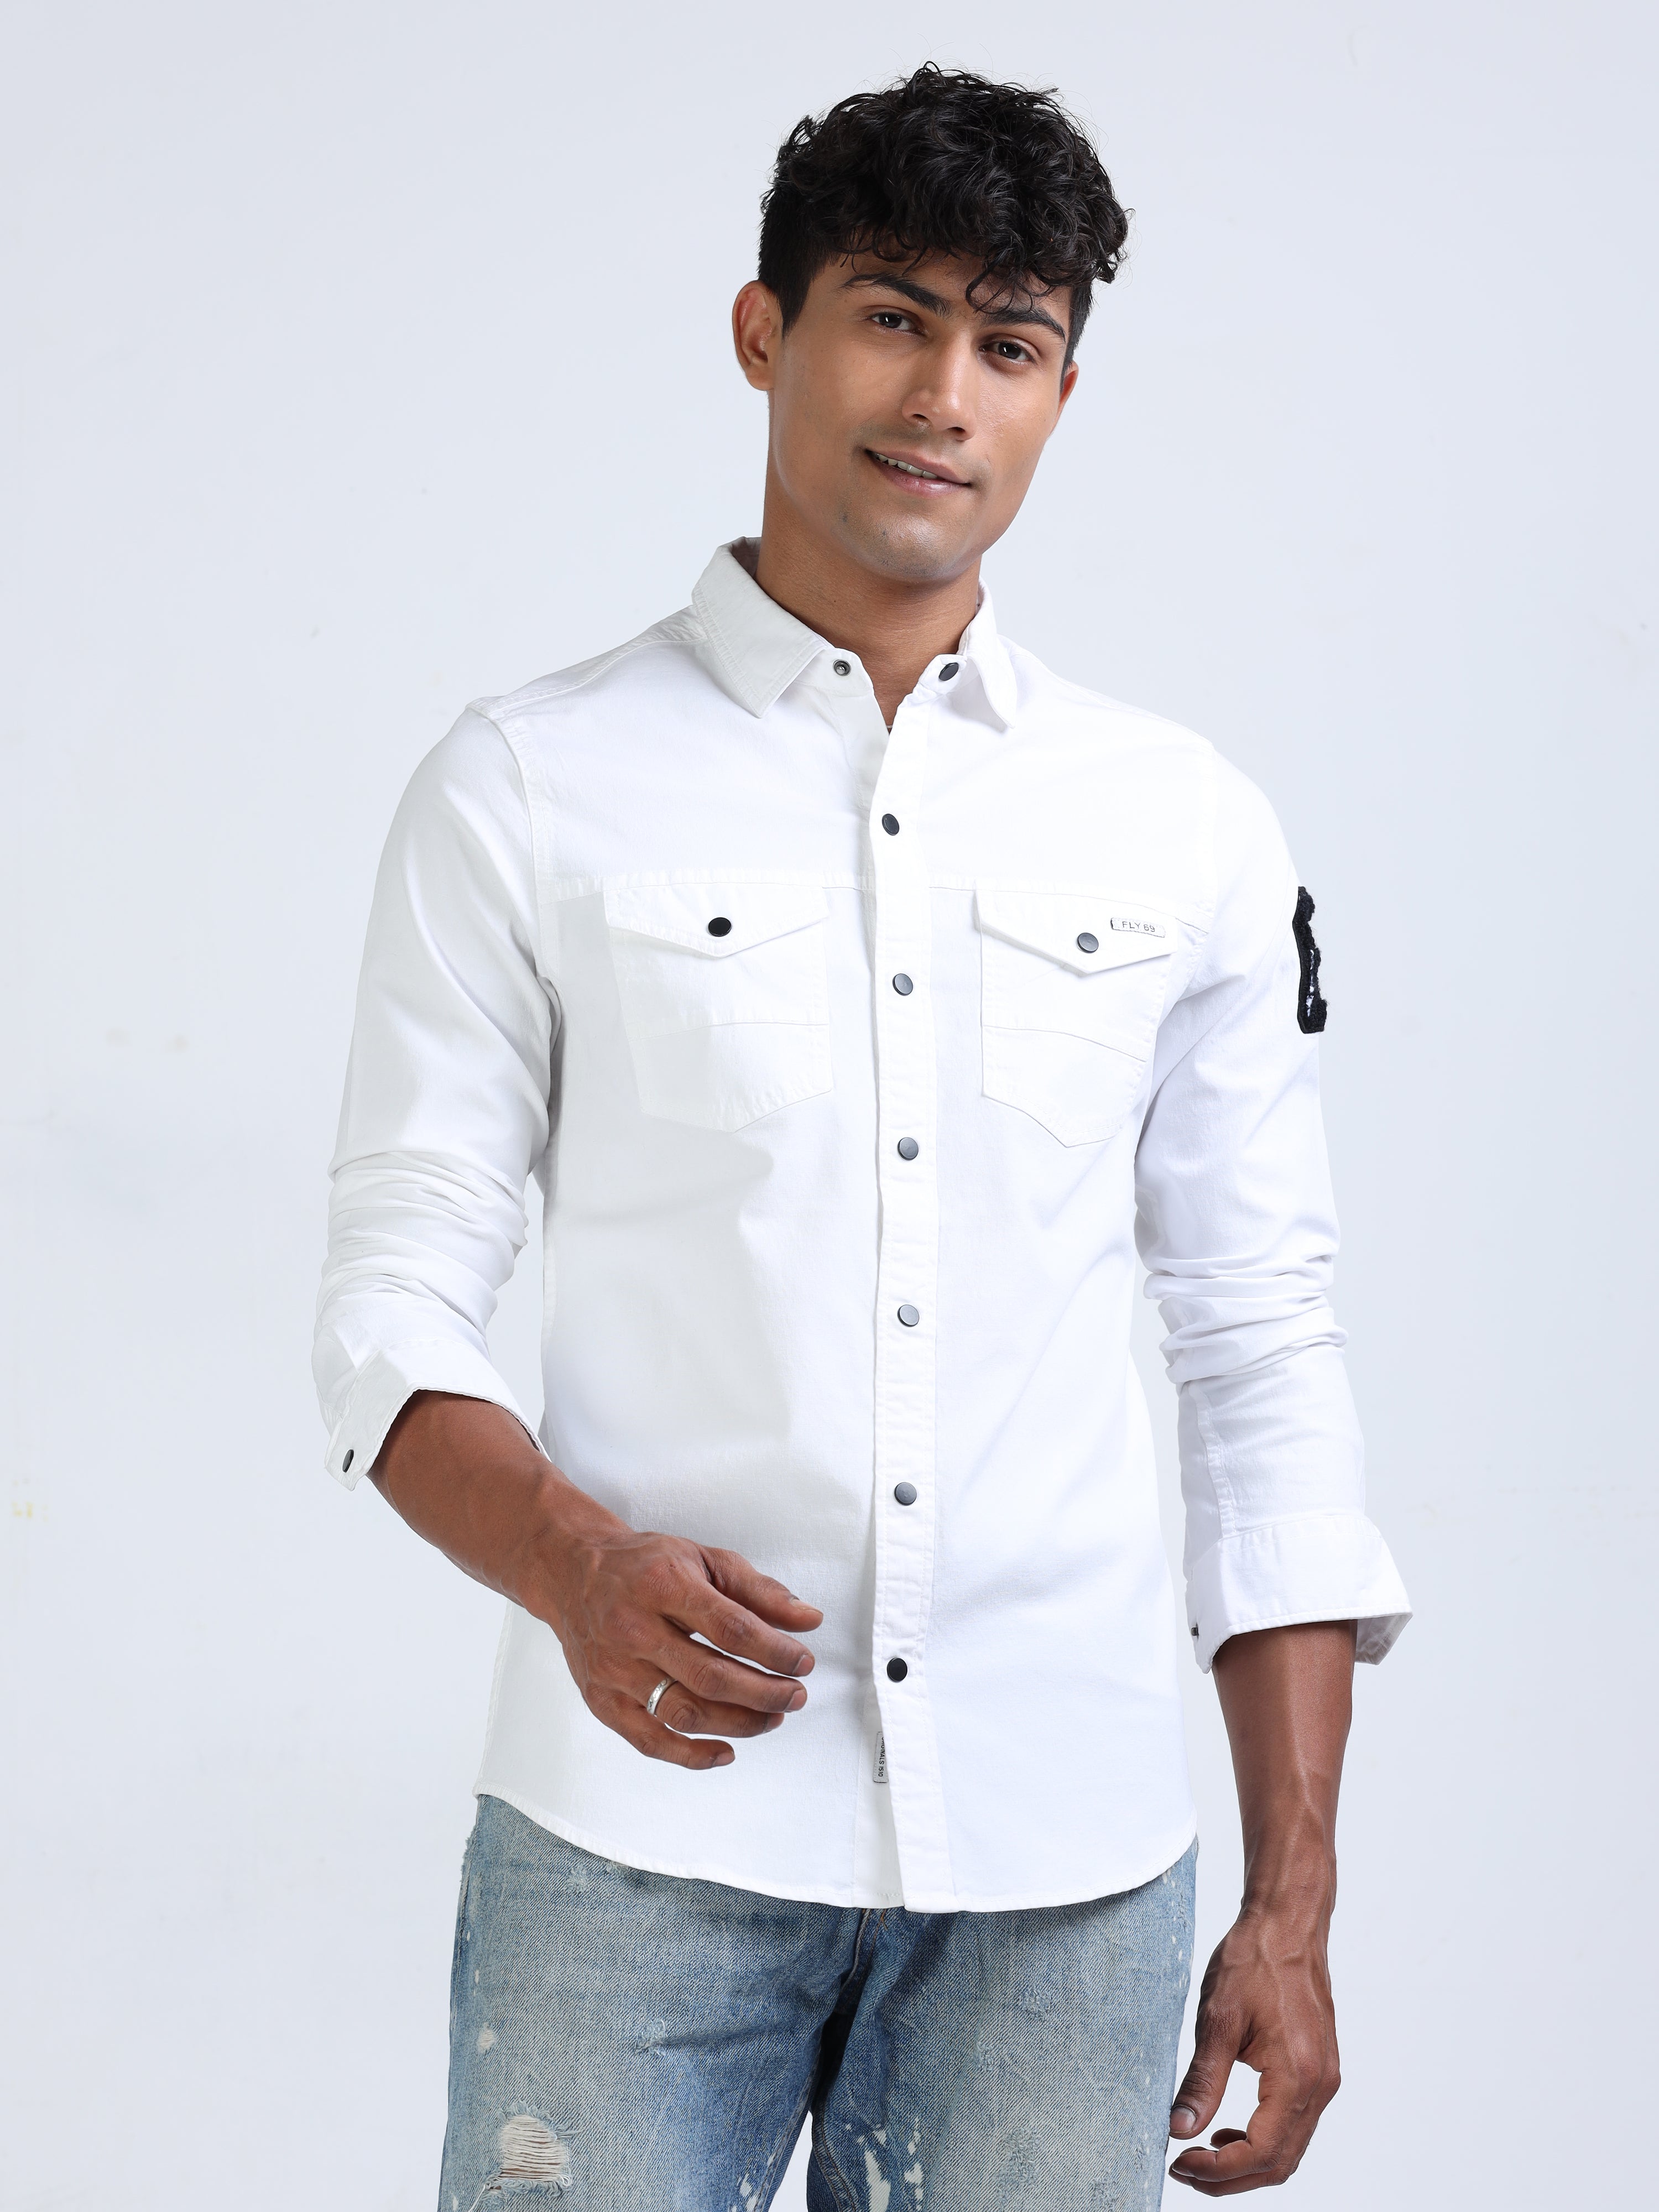 The latest collection of white denim & jeans shirts for men | FASHIOLA INDIA